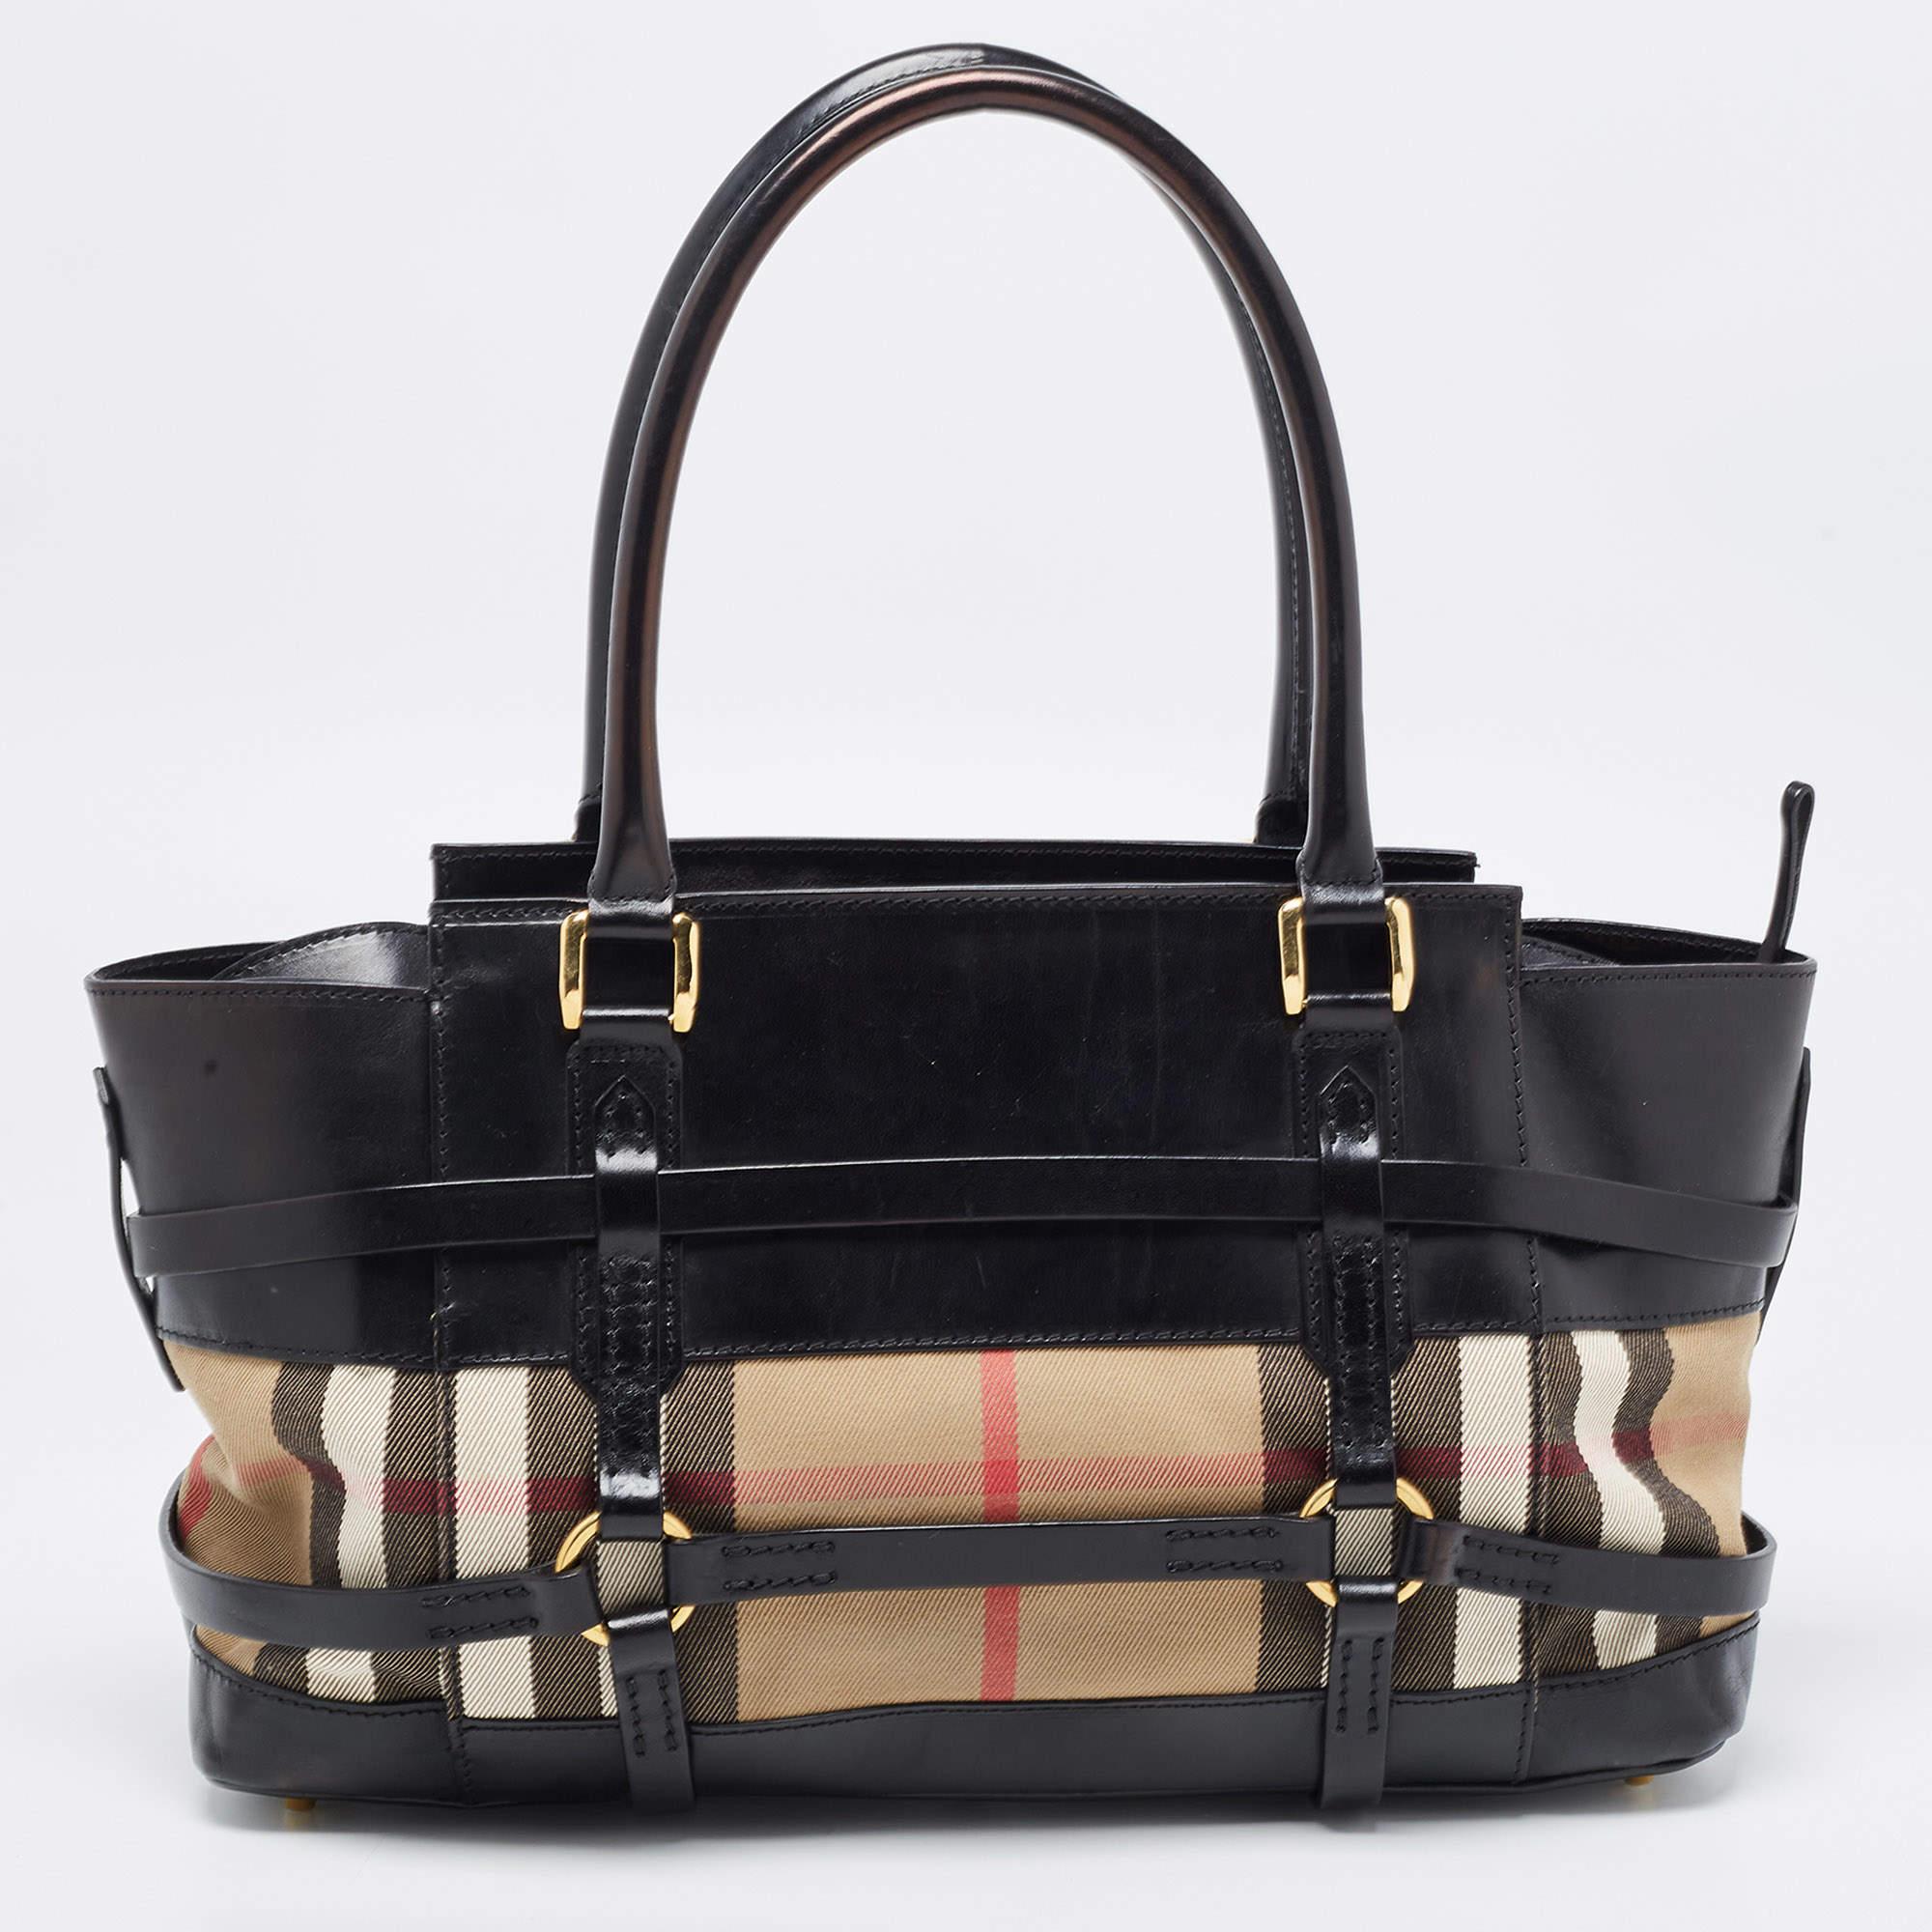 This chic and modish Burberry Satchel has the flair to complete any look. Crafted with canvas and leather, it features the classic House check print along with the belted details. This satchel is accentuated with dual top rolled leather hands along